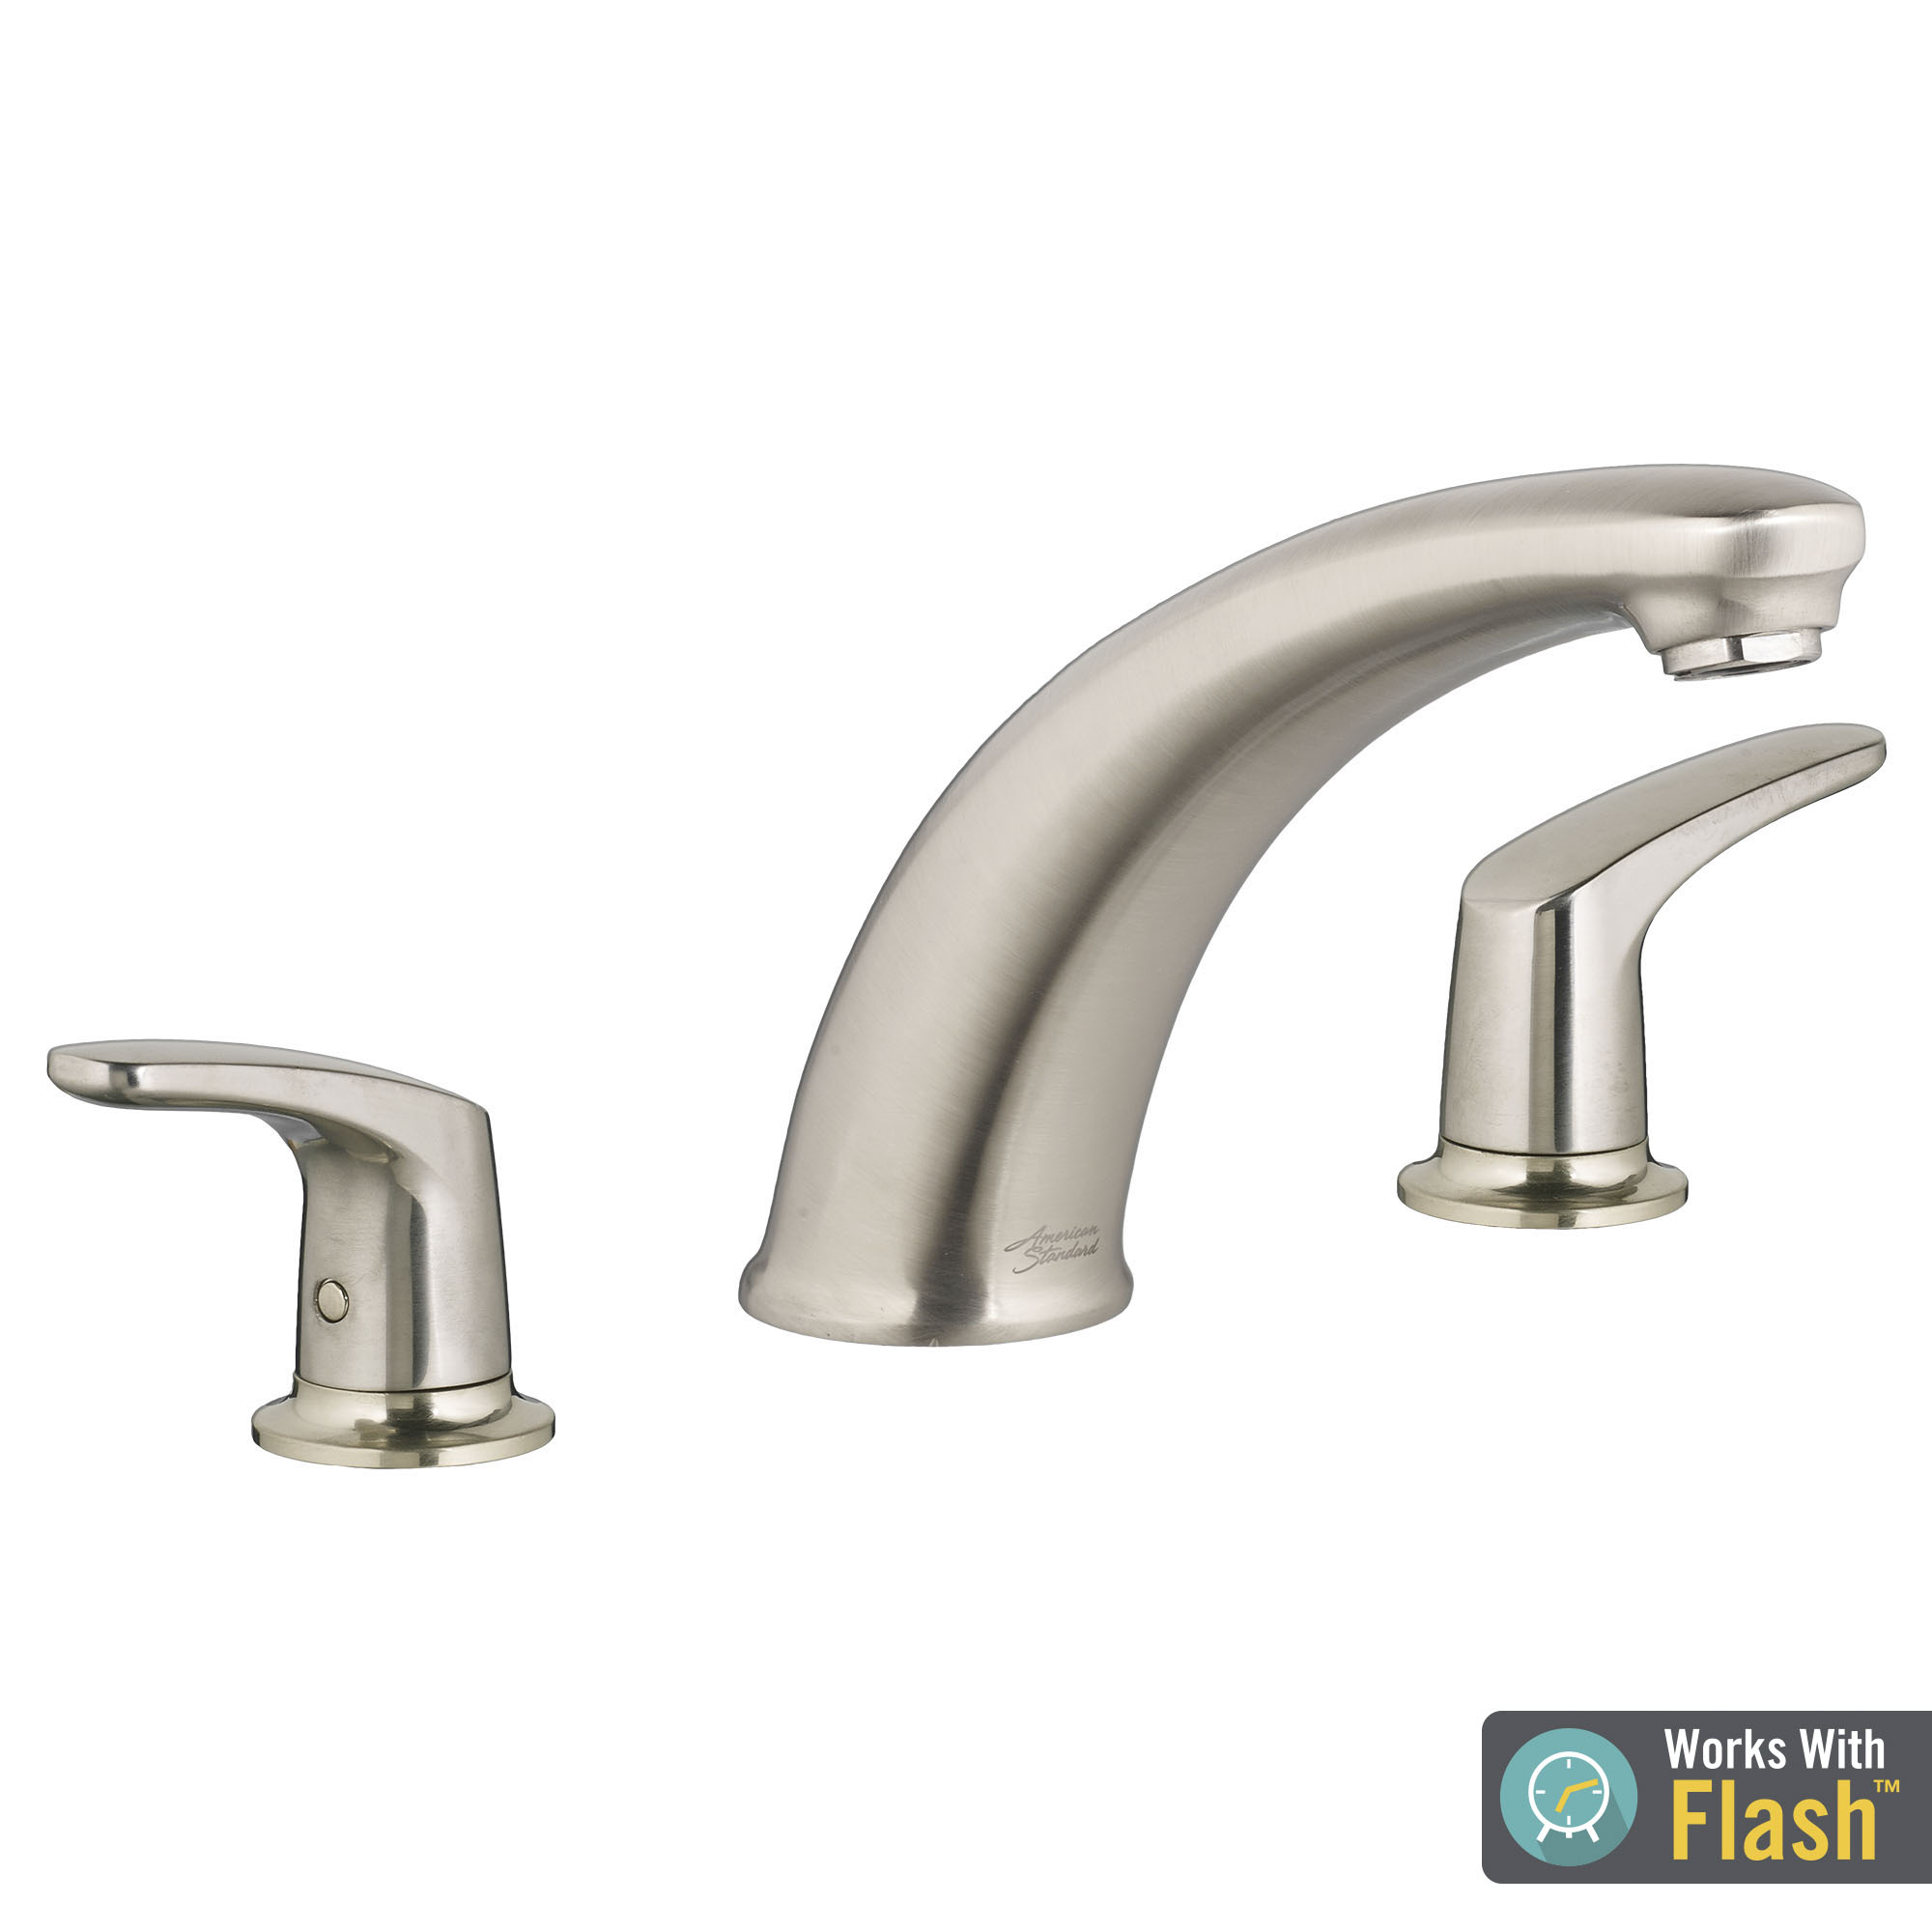 T075.920.295 COLONY PRO TUB FILLER BN A/S FLASH